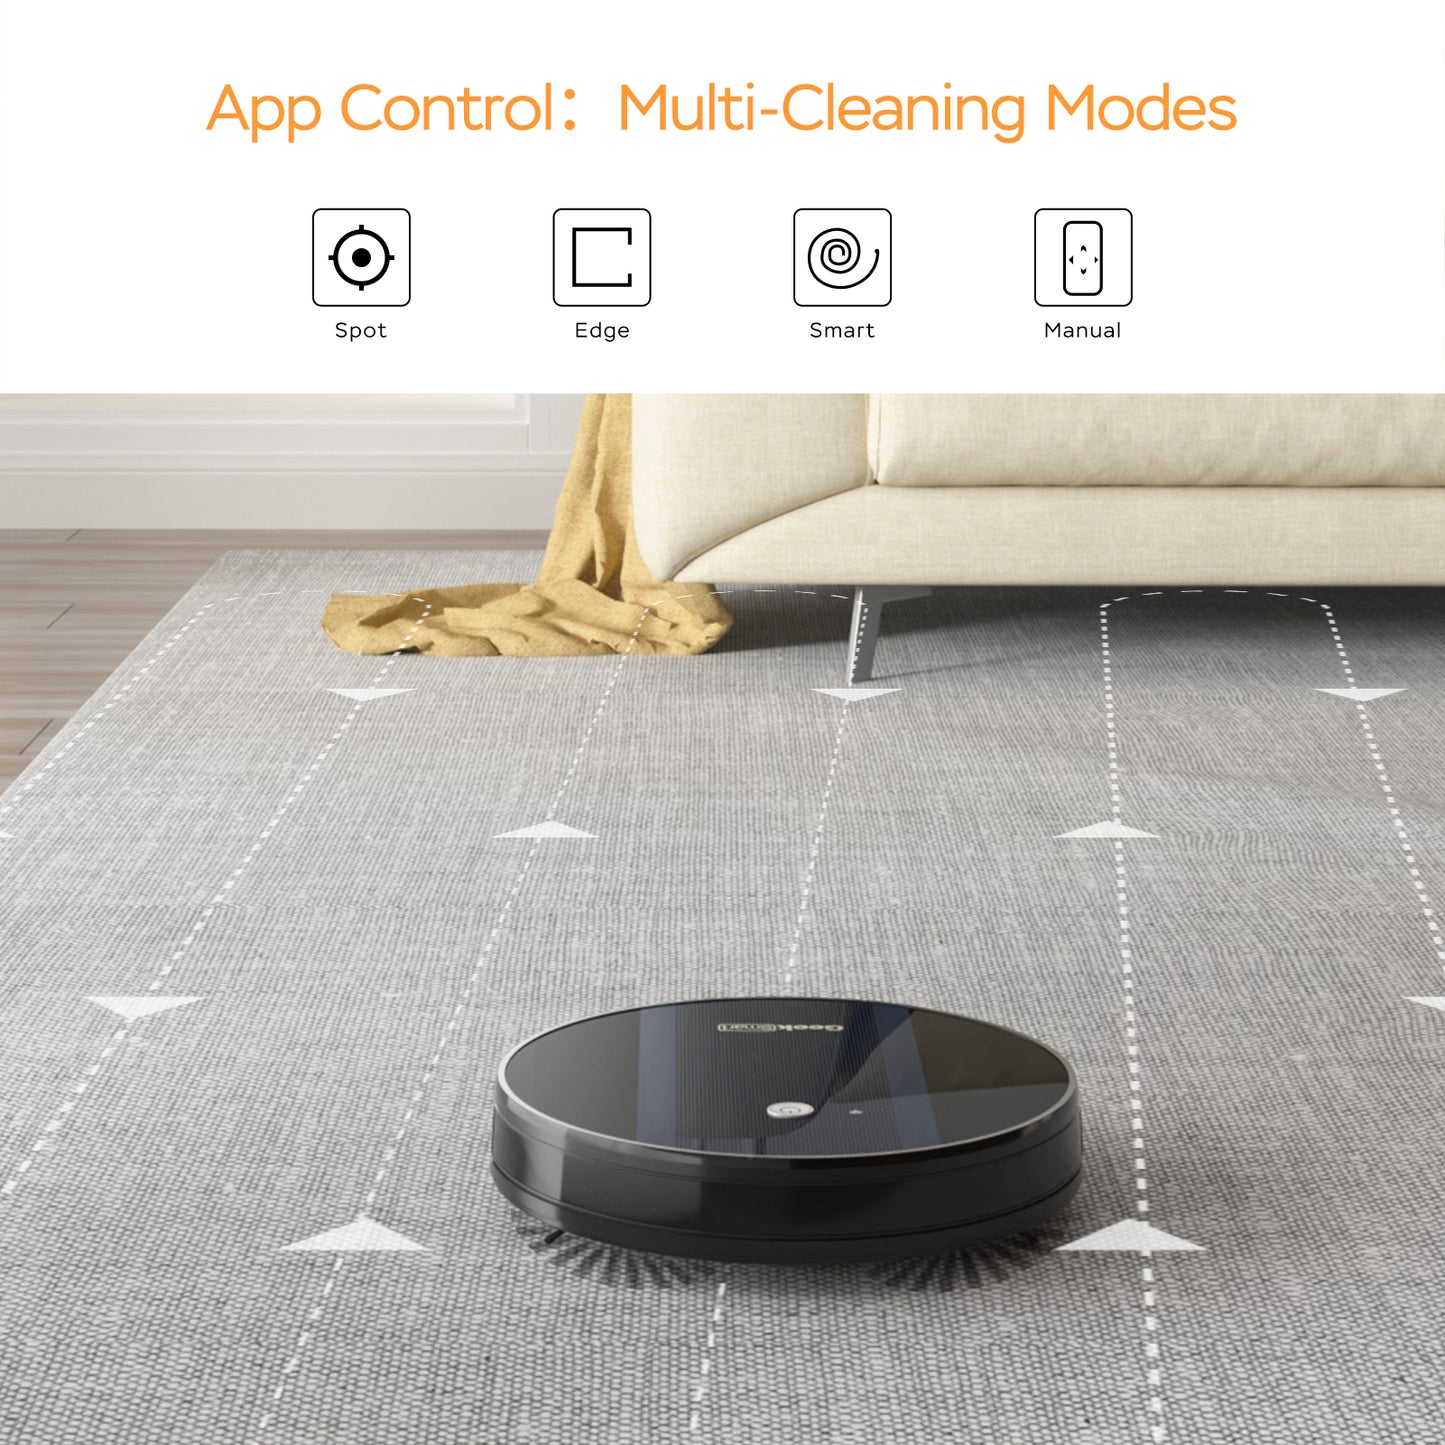 Geek Smart G6 Robot Vacuum Cleaner, Ultra-Thin, 1800Pa Strong Suction, Automatic Self-Charging, Wi-Fi Connect, App Control, Great for Hard Floors to Carpets